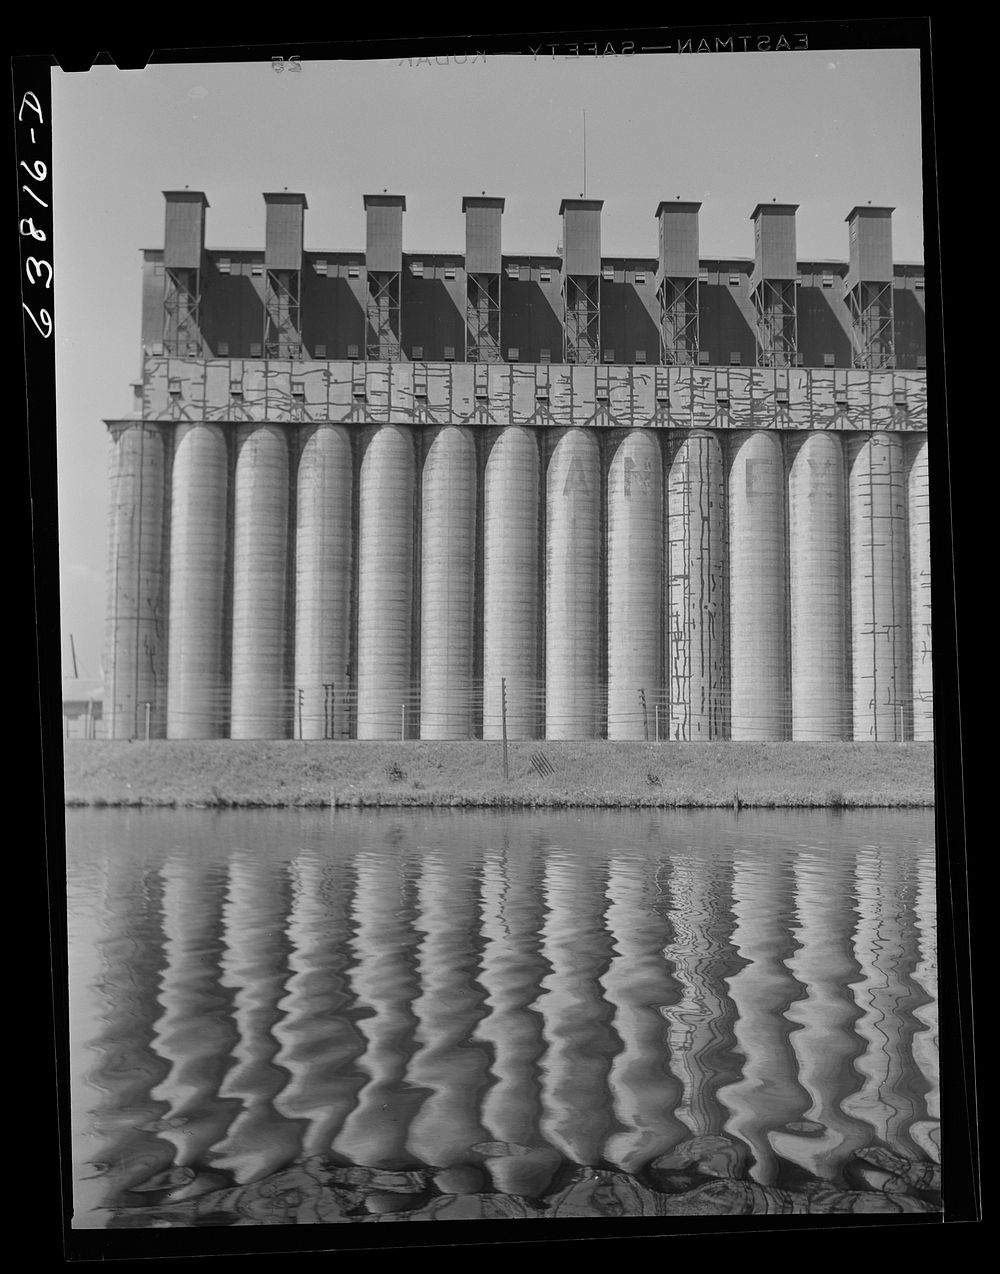 Grain elevator. Superior, Wisconsin. Sourced from the Library of Congress.